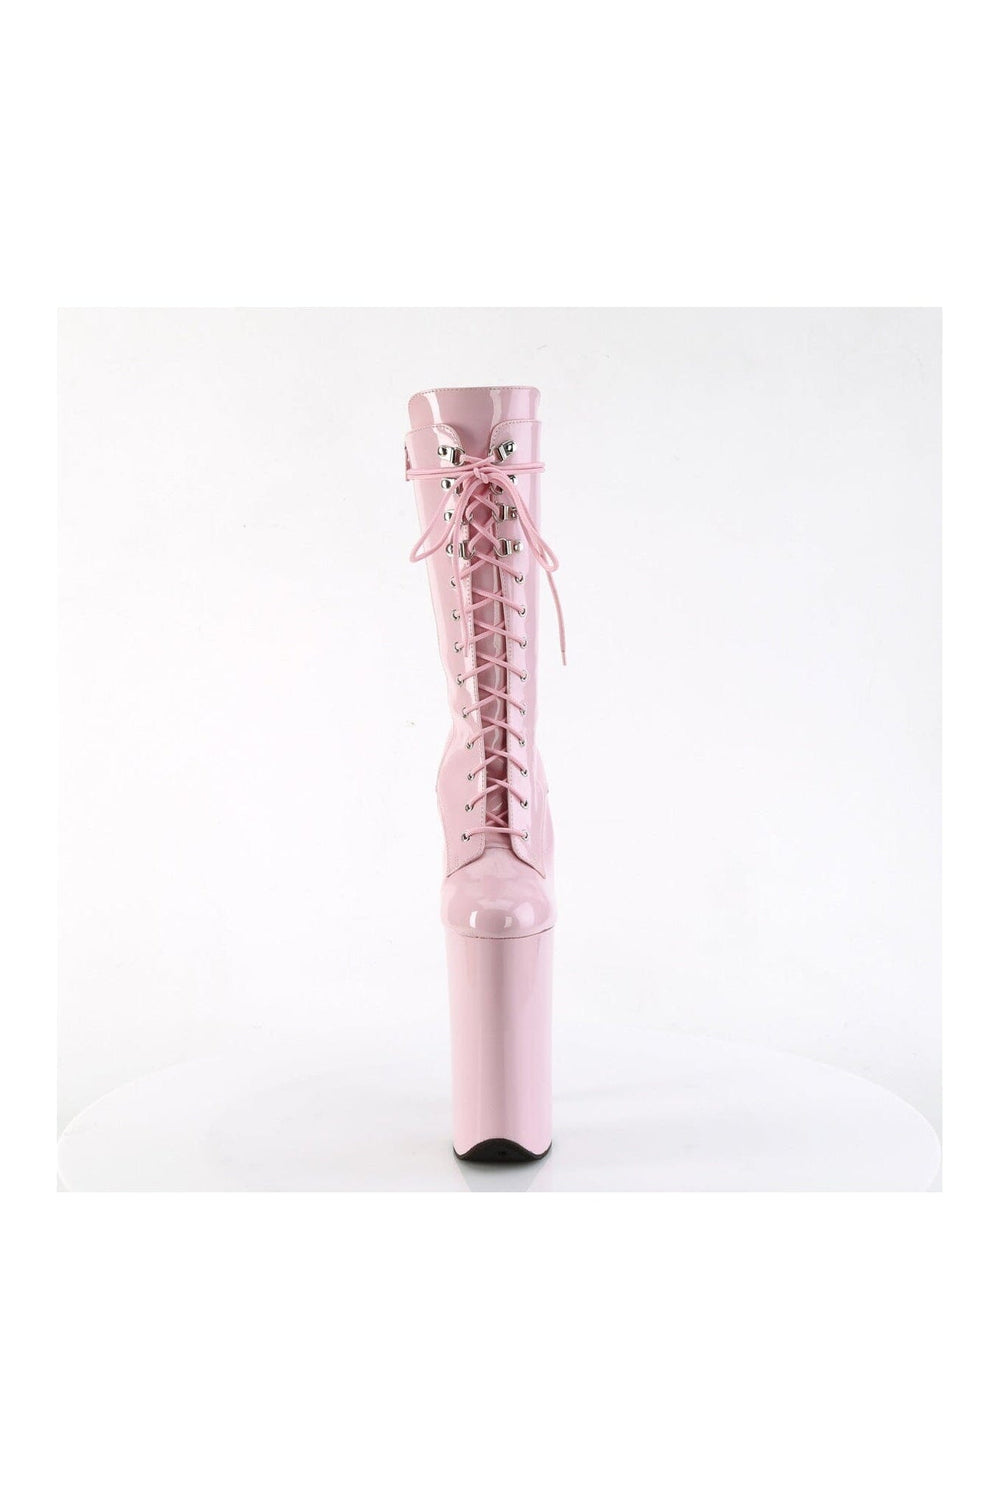 BEYOND-1050 Pink Patent Knee Boot-Knee Boots-Pleaser-SEXYSHOES.COM